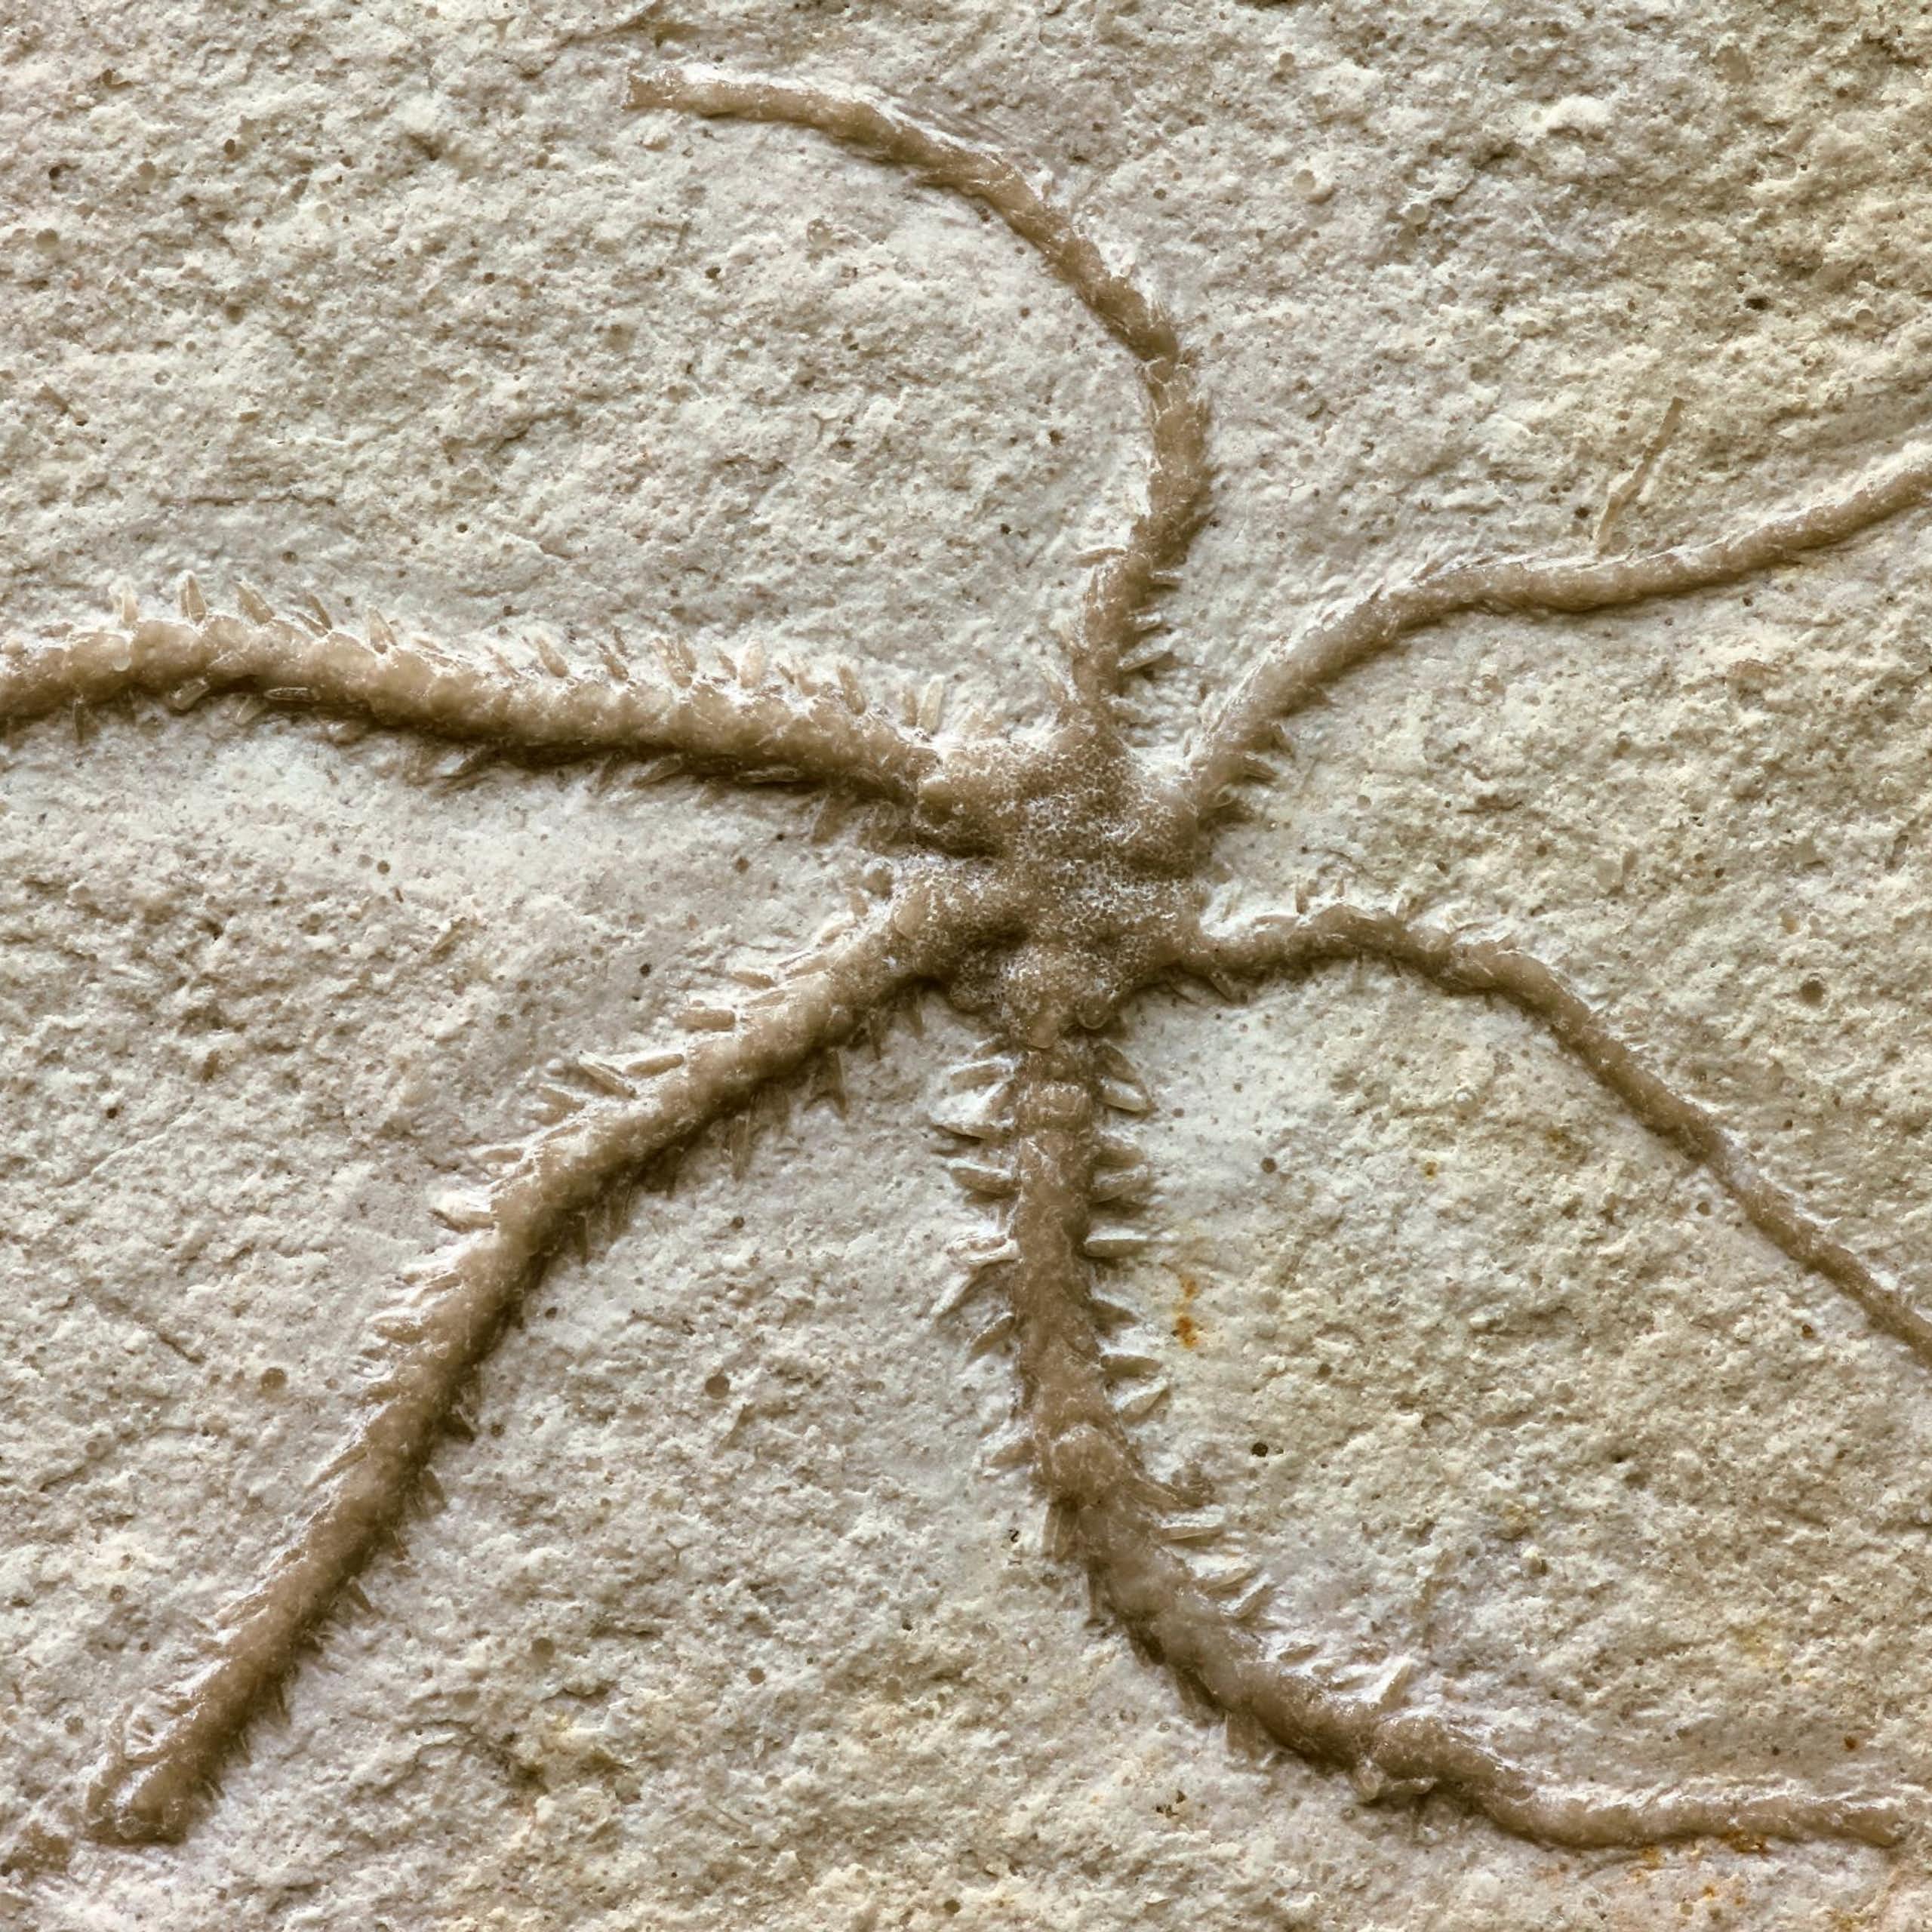 Brown outline of a thin starfish on rock